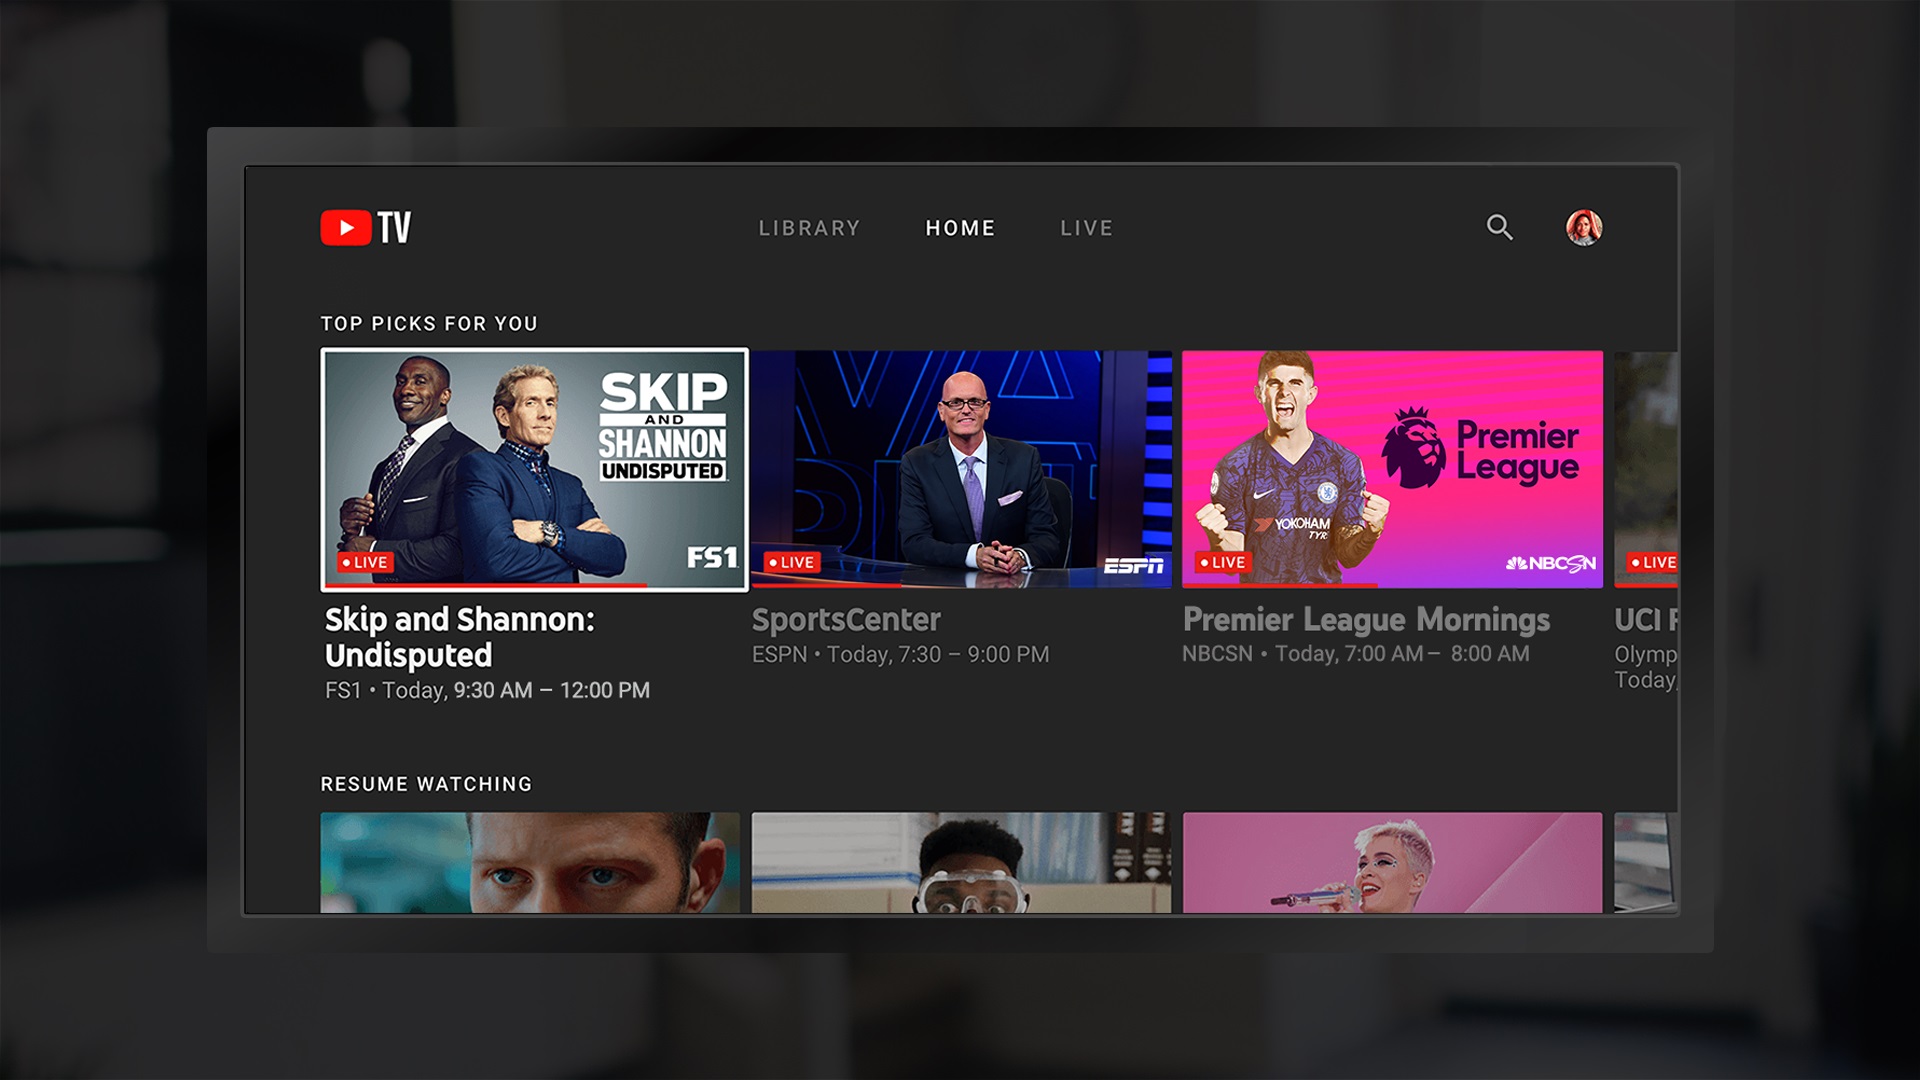 If you have YouTube TV you may soon lose 18 channels including ESPN